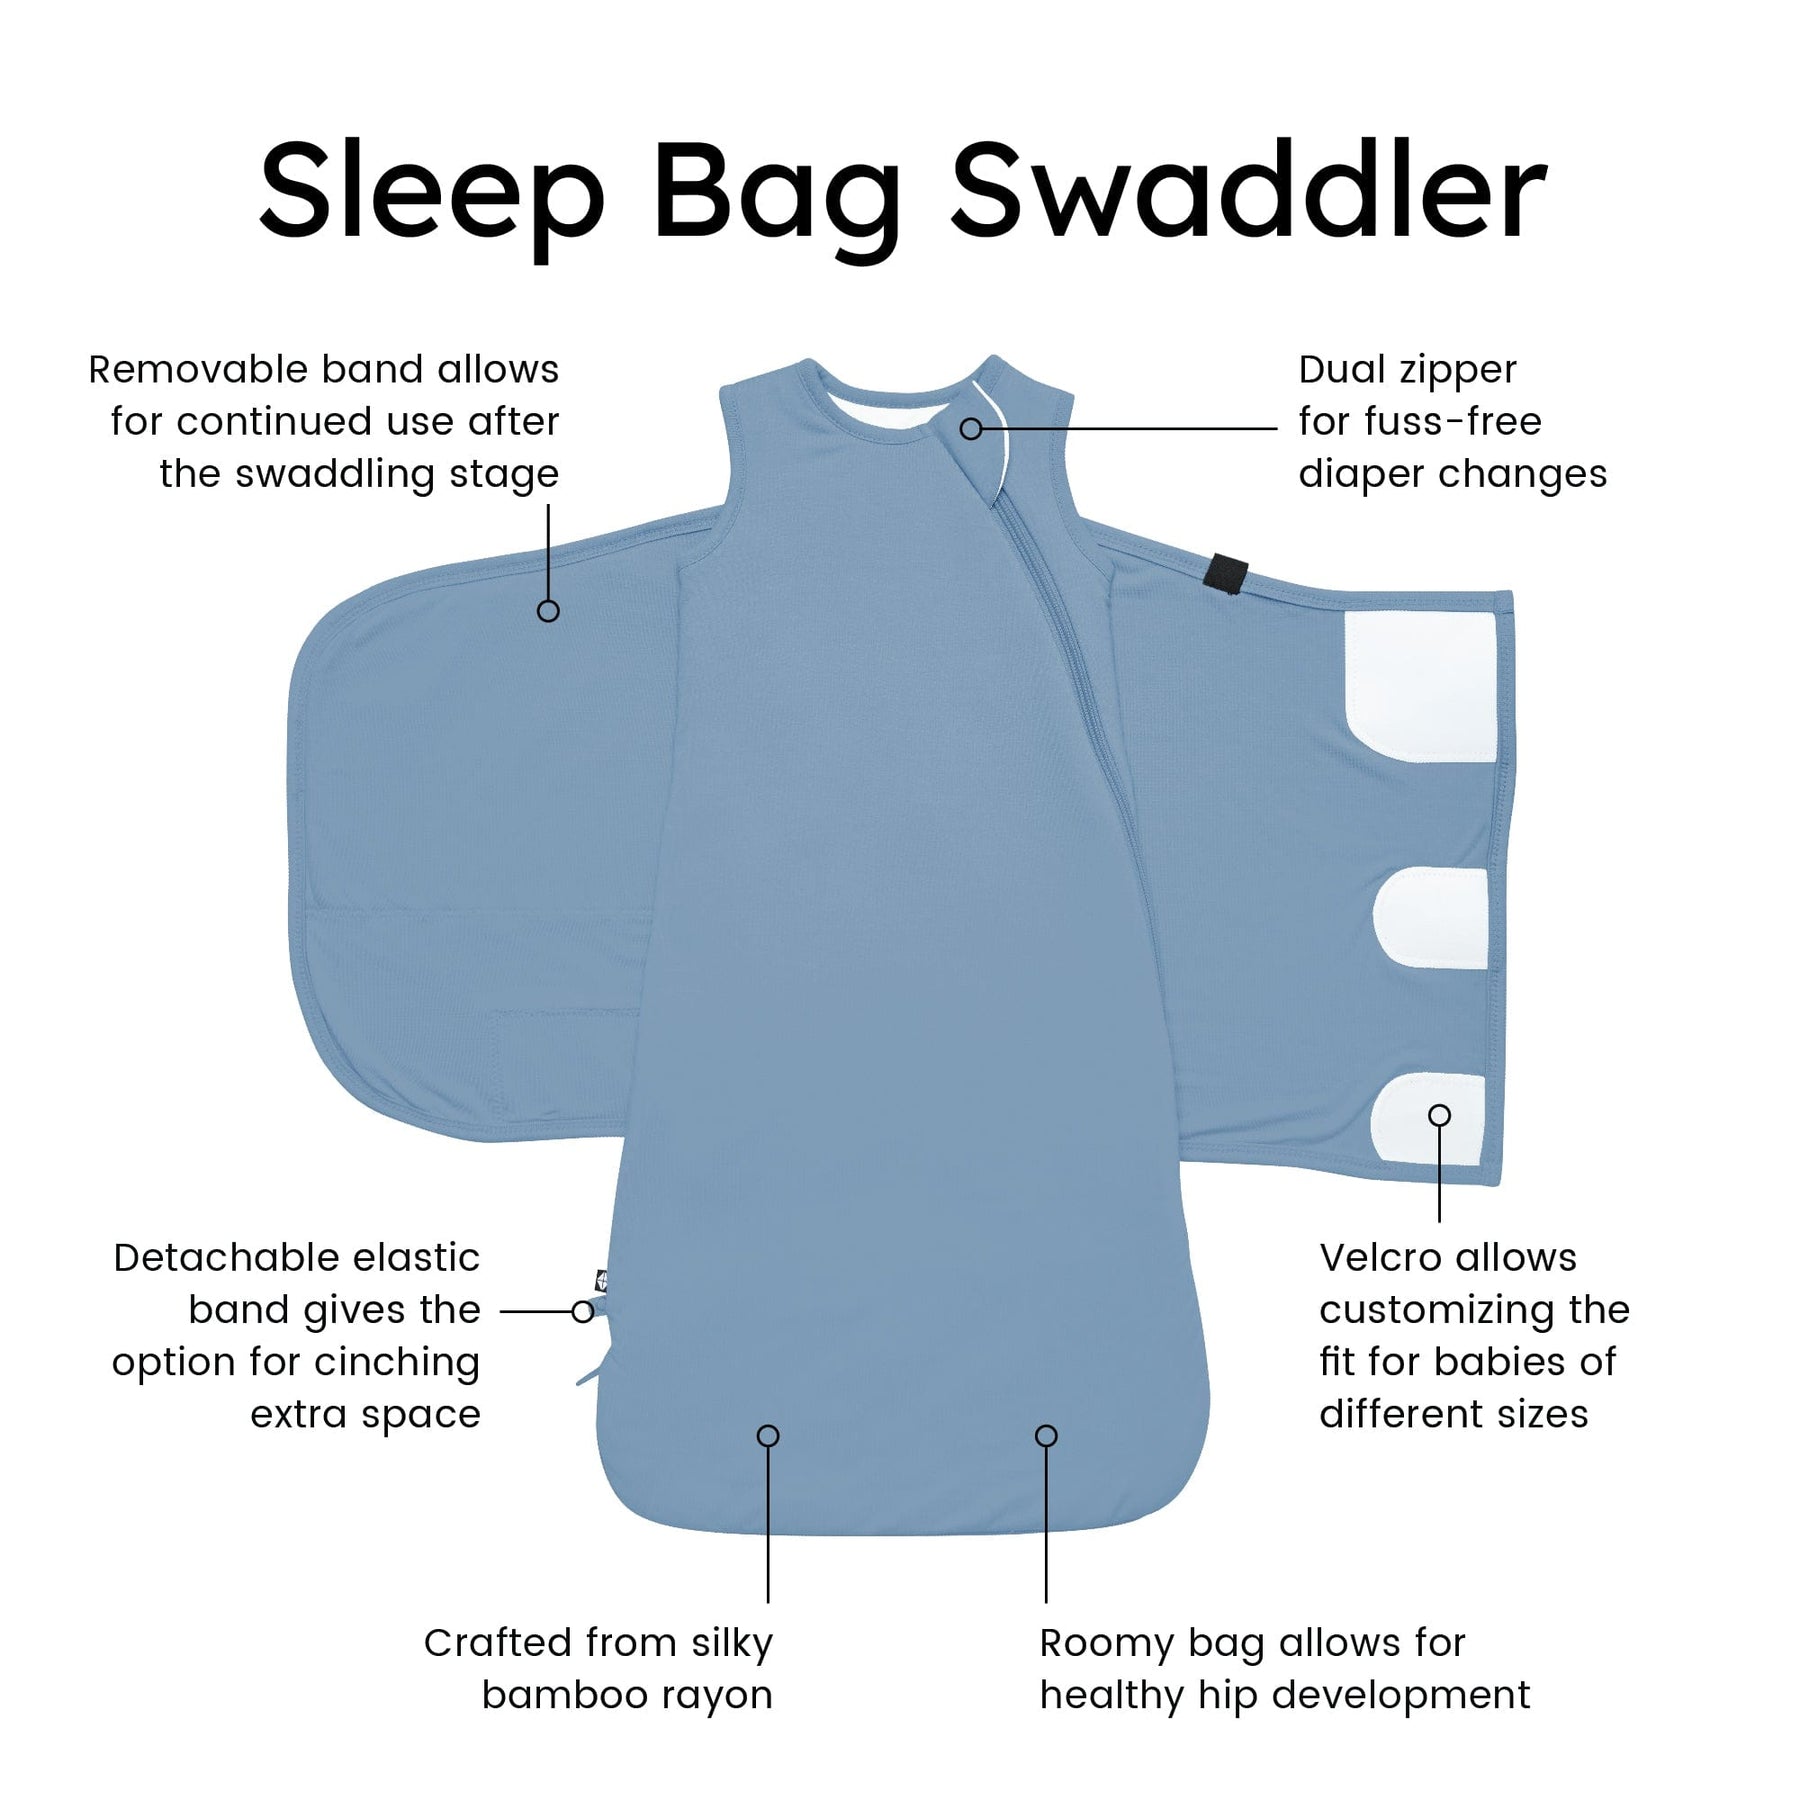 Kyte Baby Sleep Bag Swaddler in Slate with benefits listed